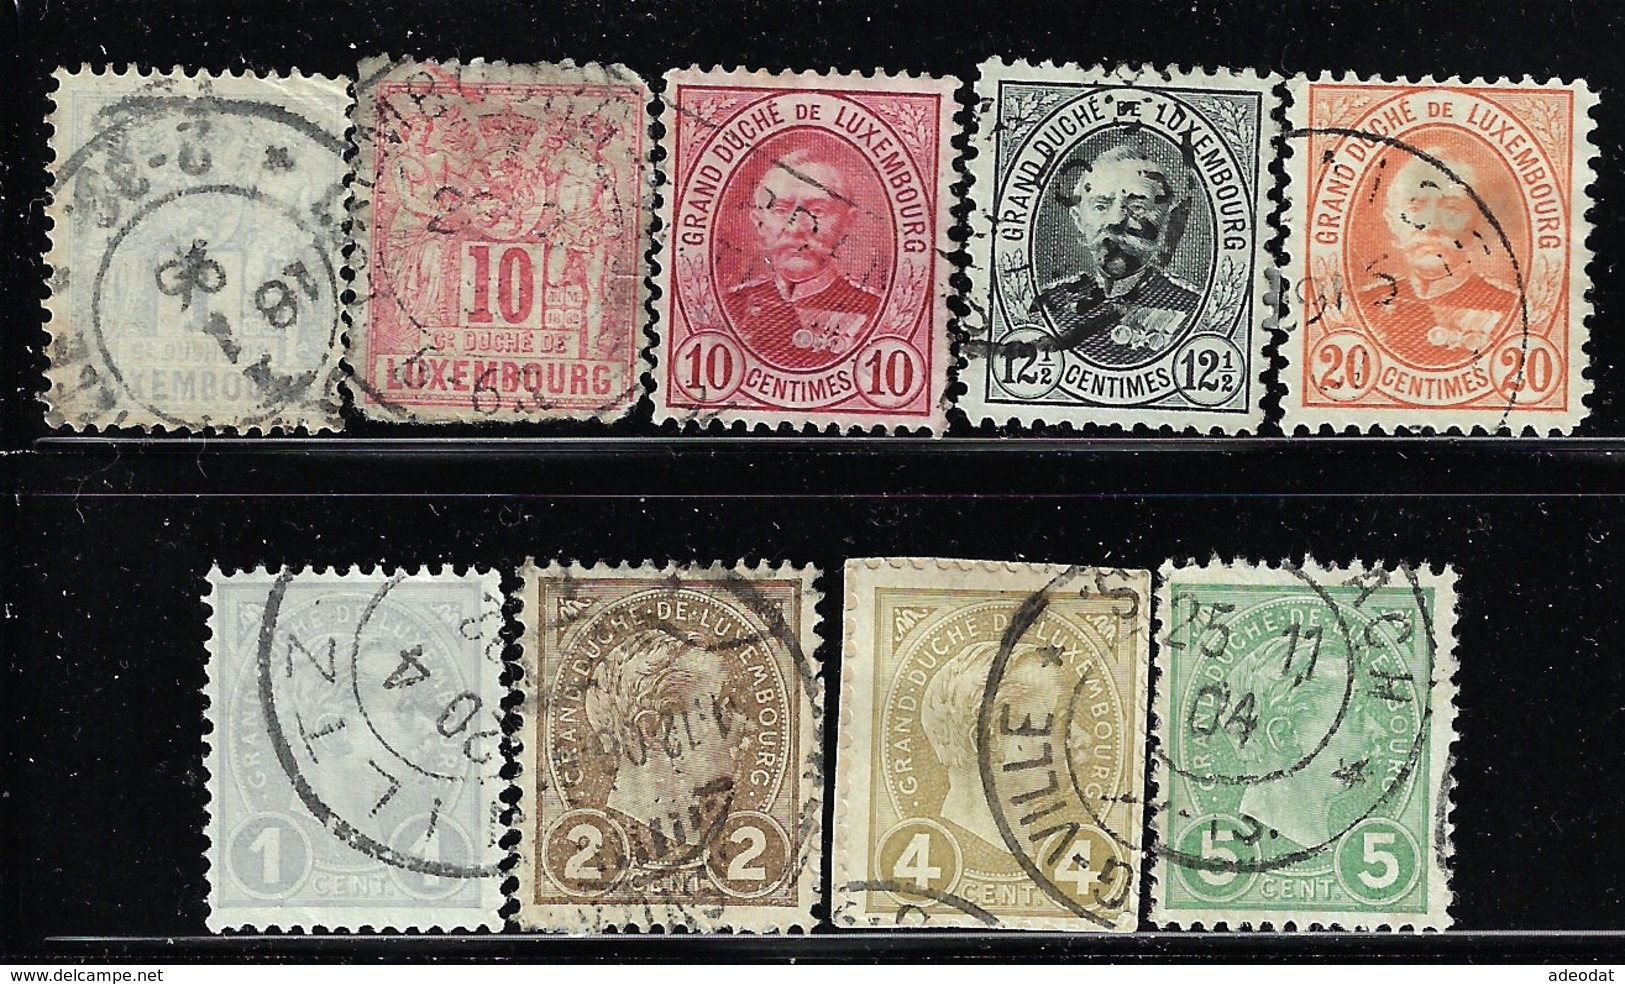 LUXEMBOURG 1882,1891 SCOTT 48,52,60-62,70-73 CANCELLED CATALOGUE VALUE US$4.40 - 1882 Allegory